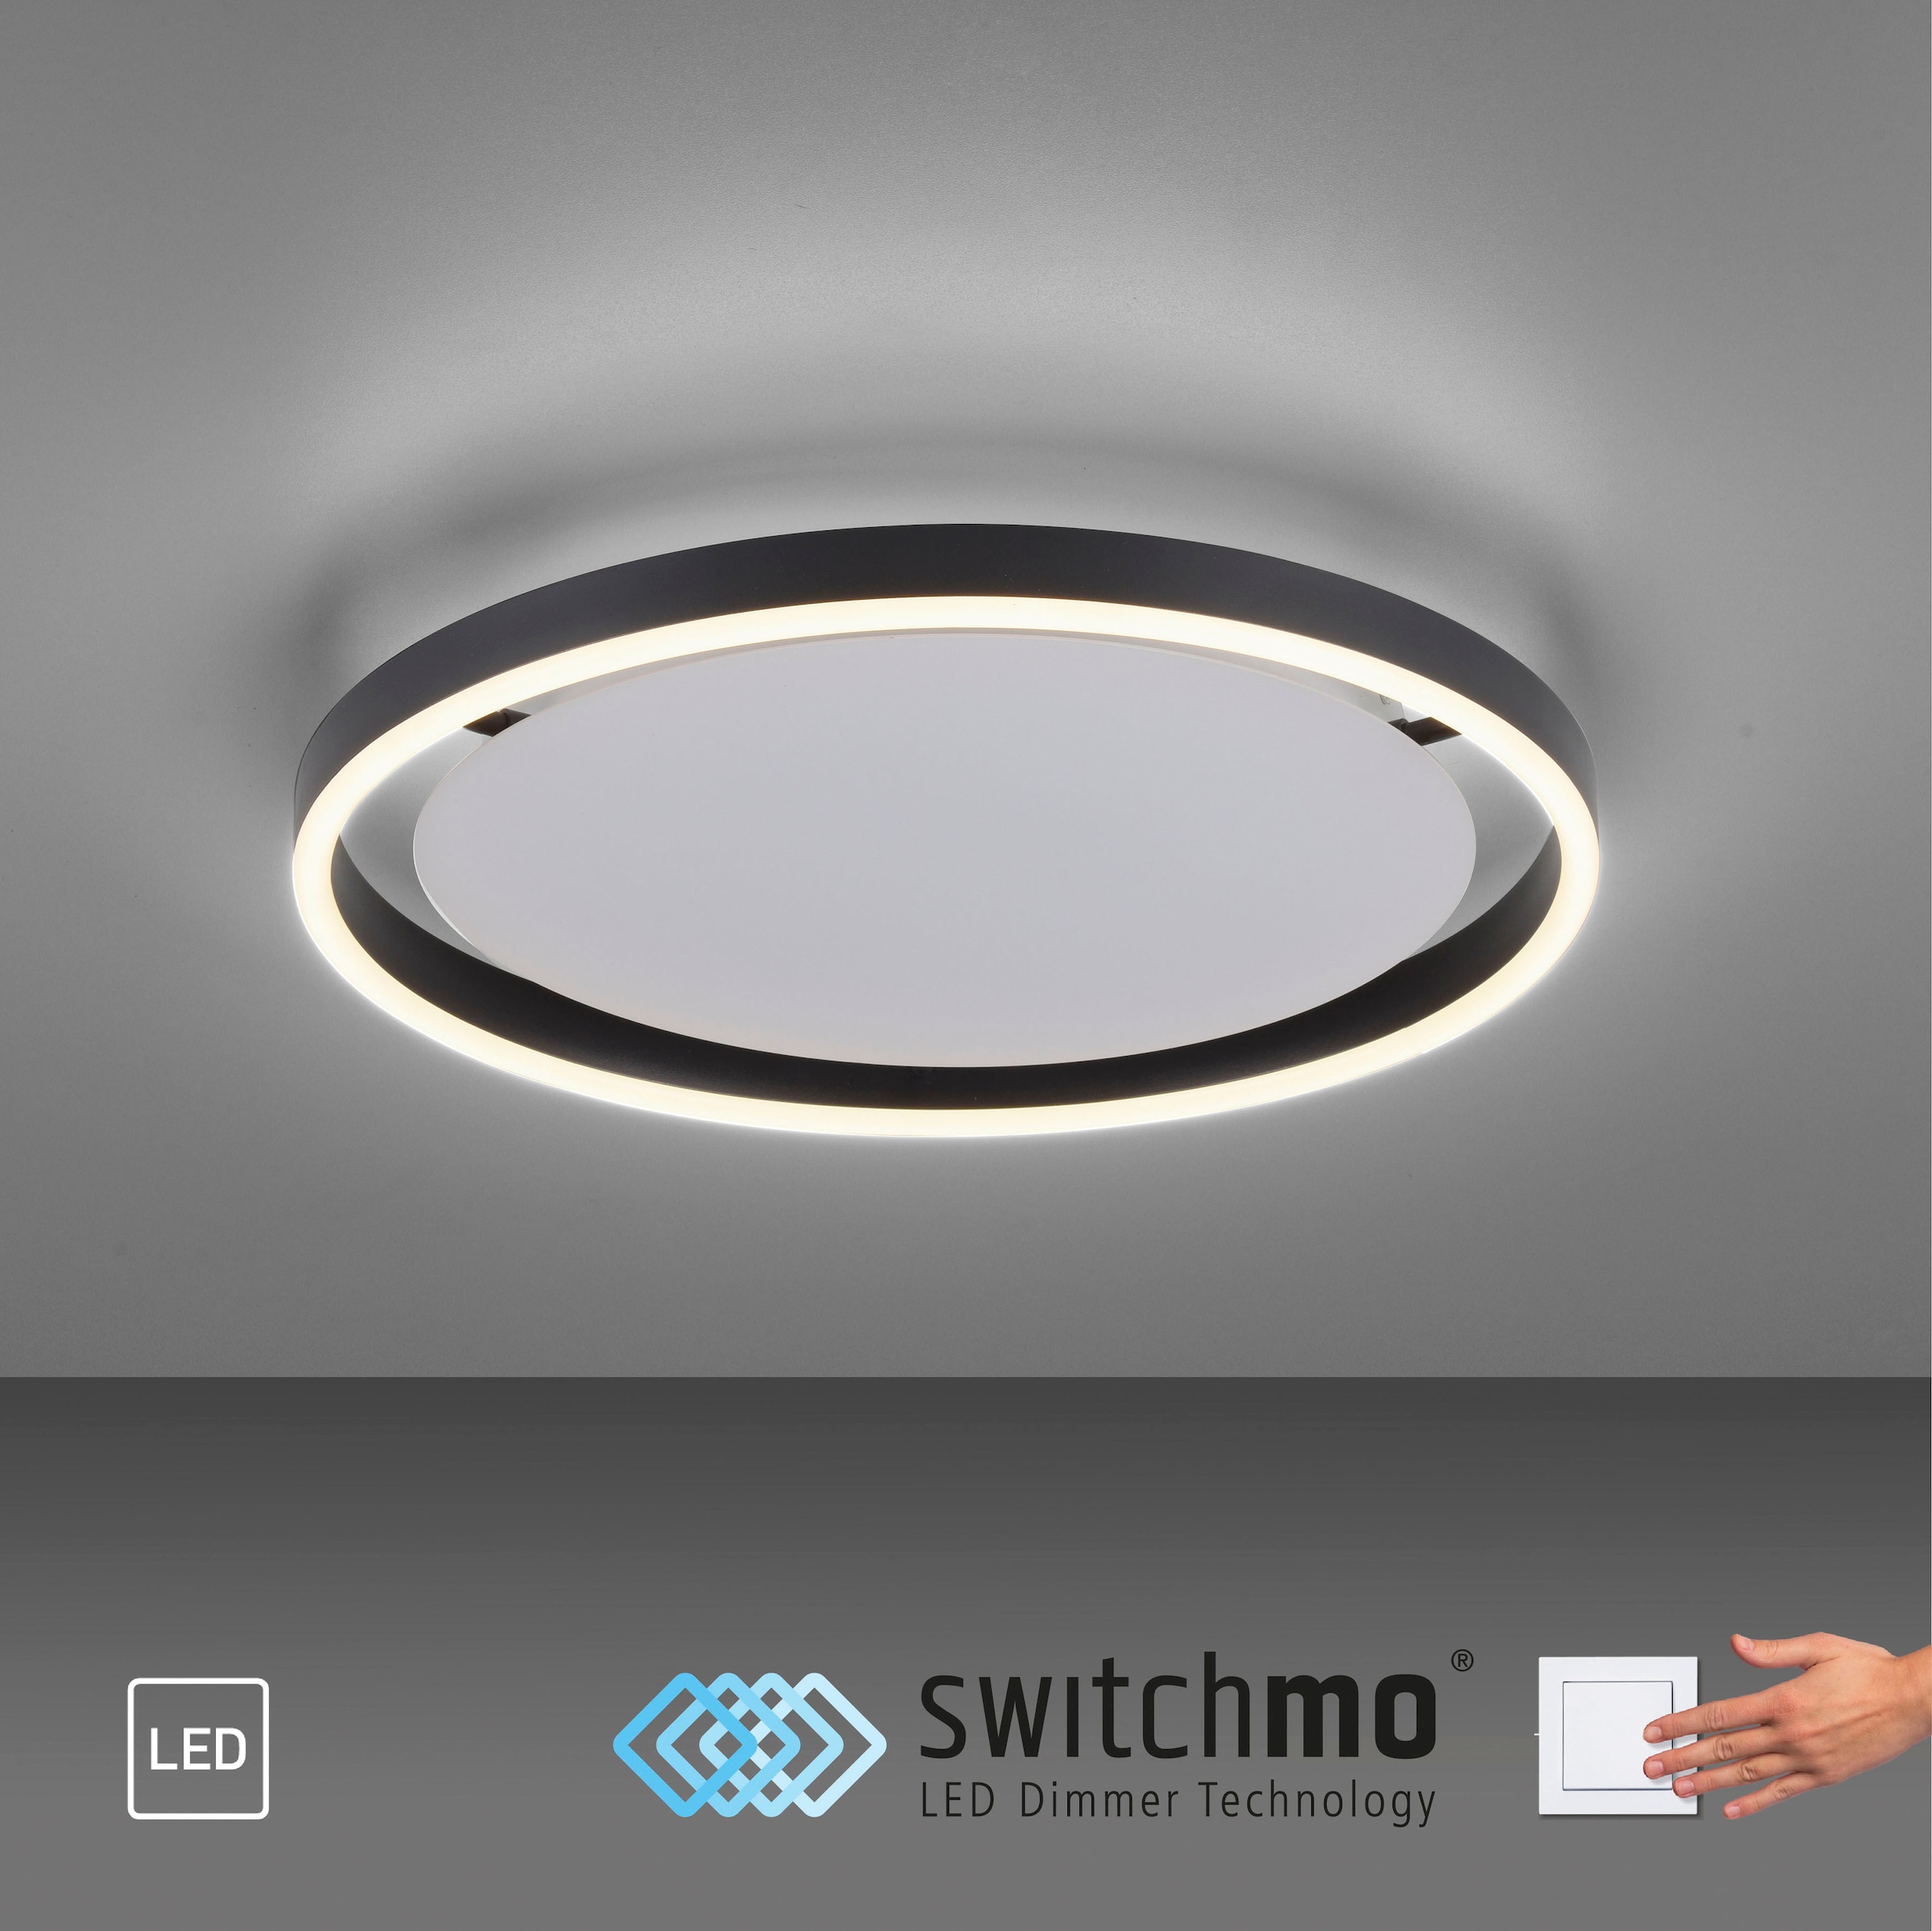 JUST LIGHT 1 »RITUS«, Shop dimmbar, LED, Switchmo, Online im OTTO Switchmo Deckenleuchte dimmbar, flammig-flammig